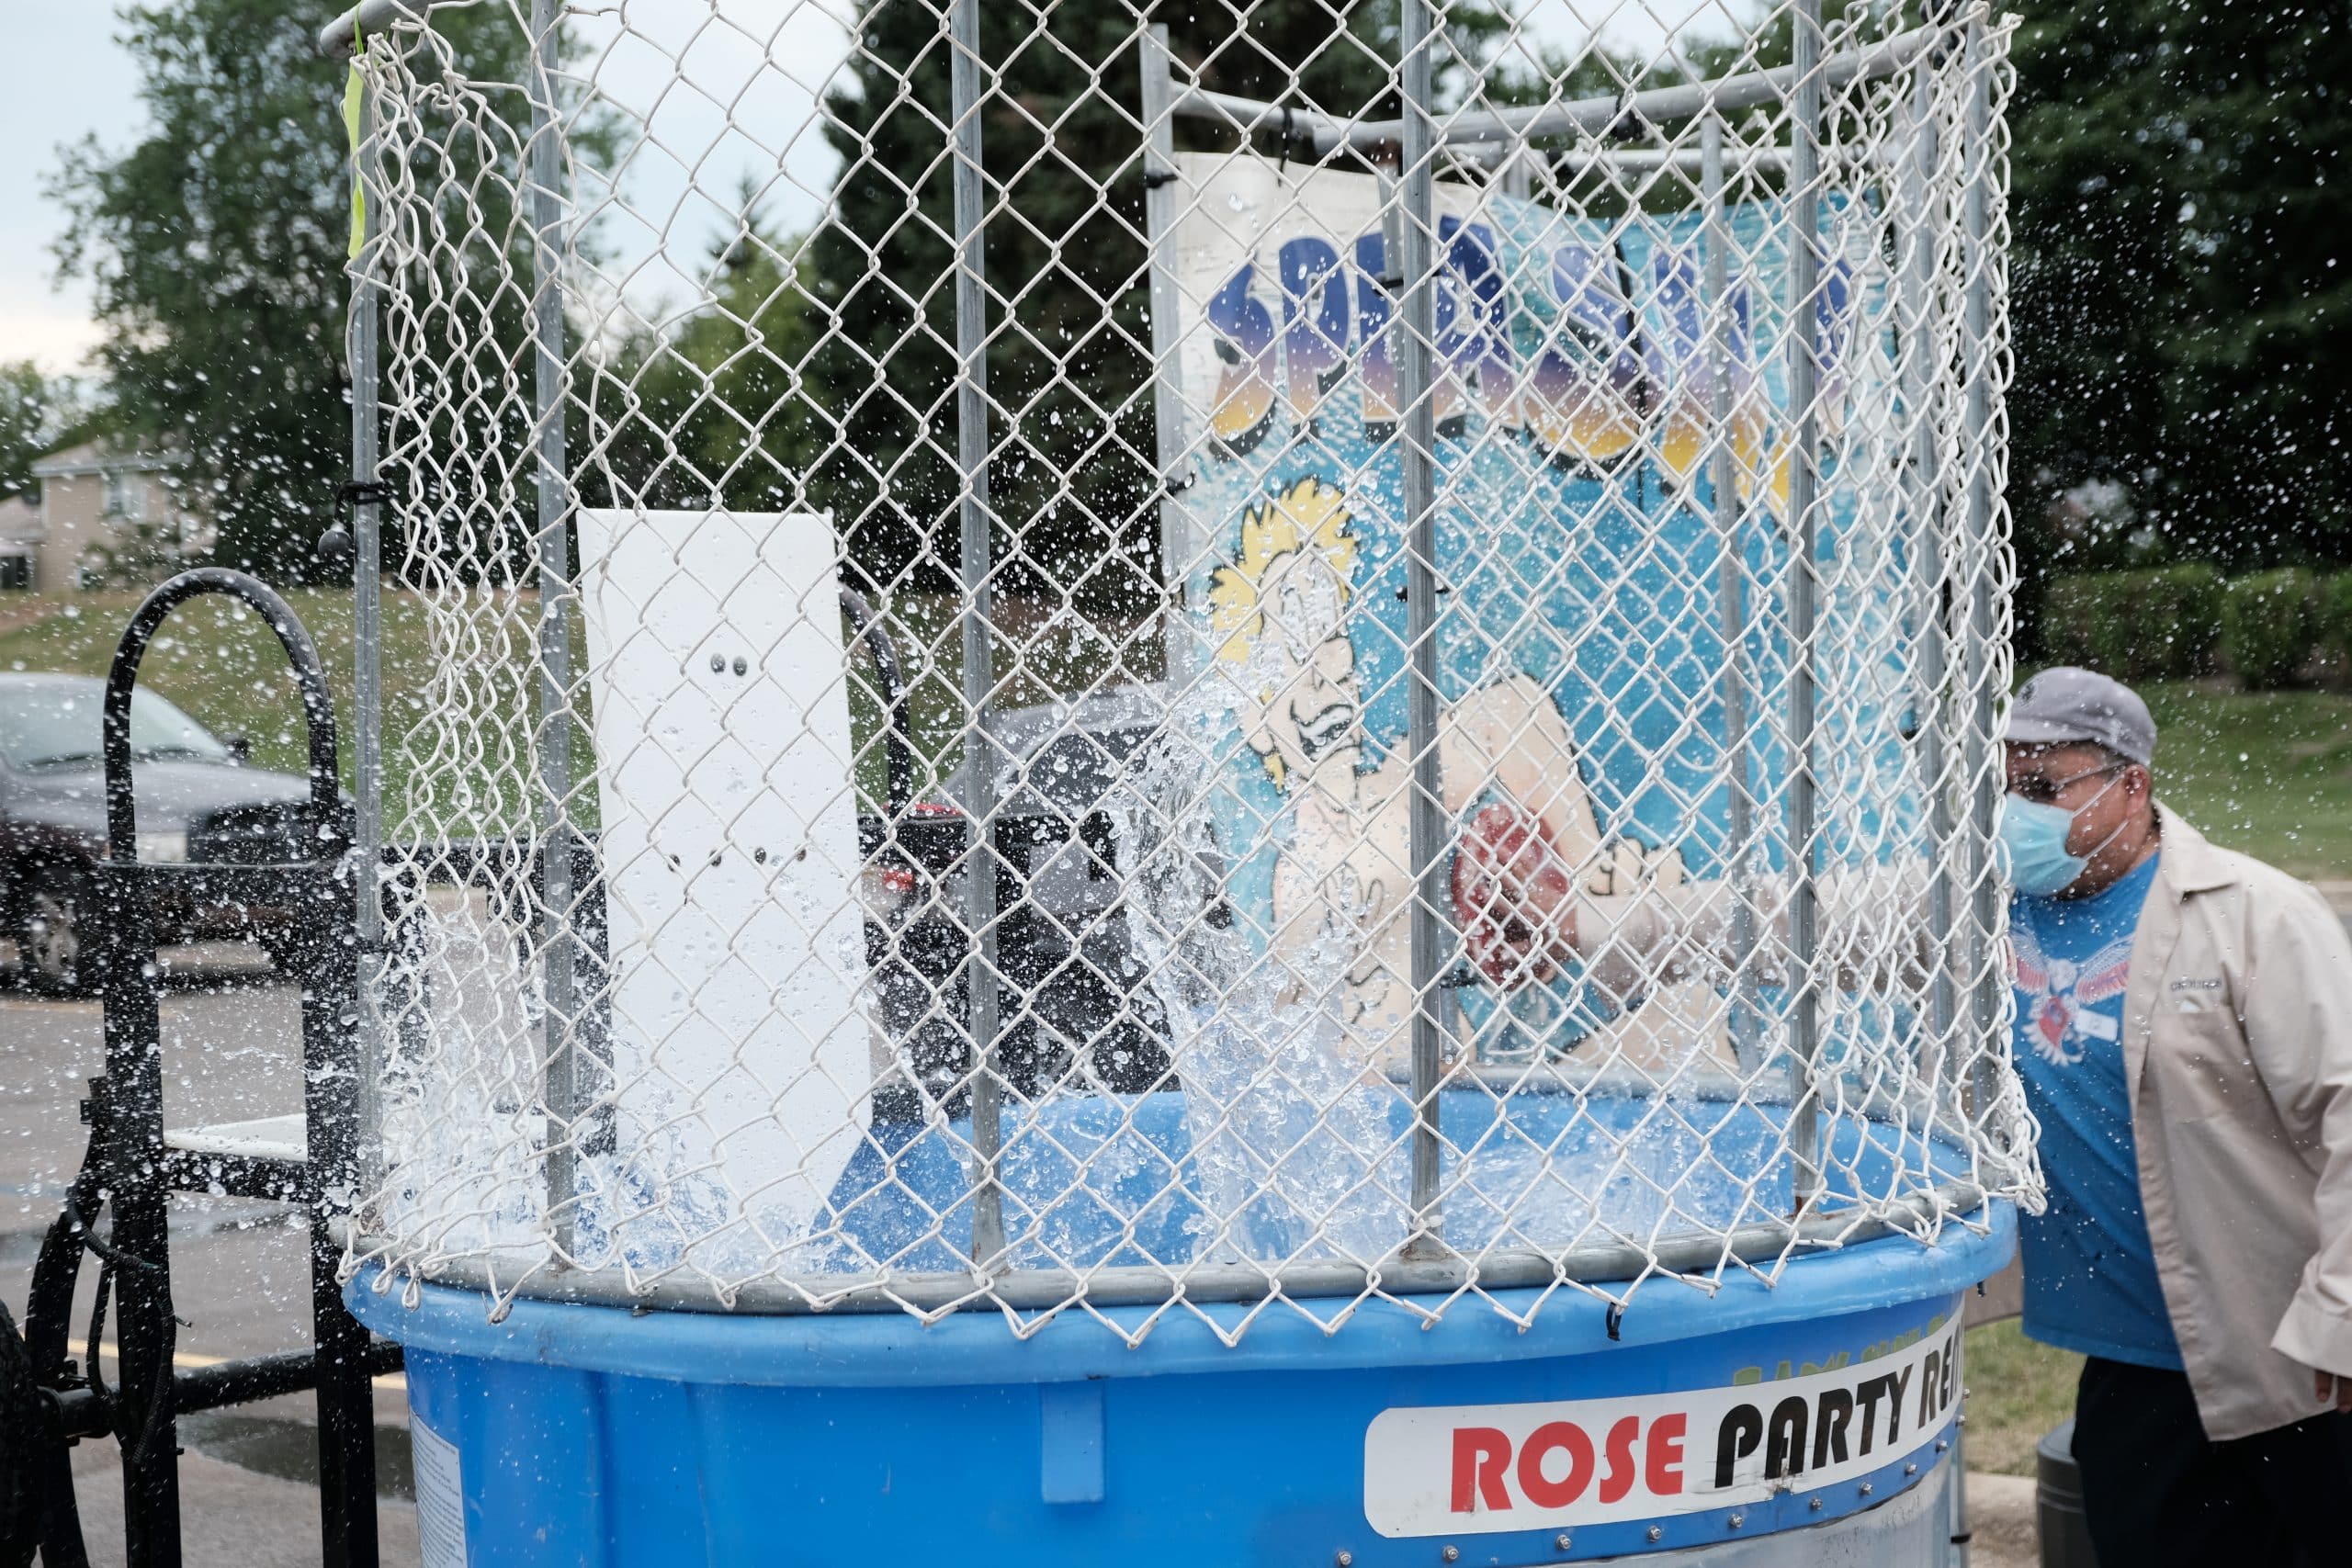 Water splashes into the air after a Simmons employee dunks Production Manager Enver Baftijari.